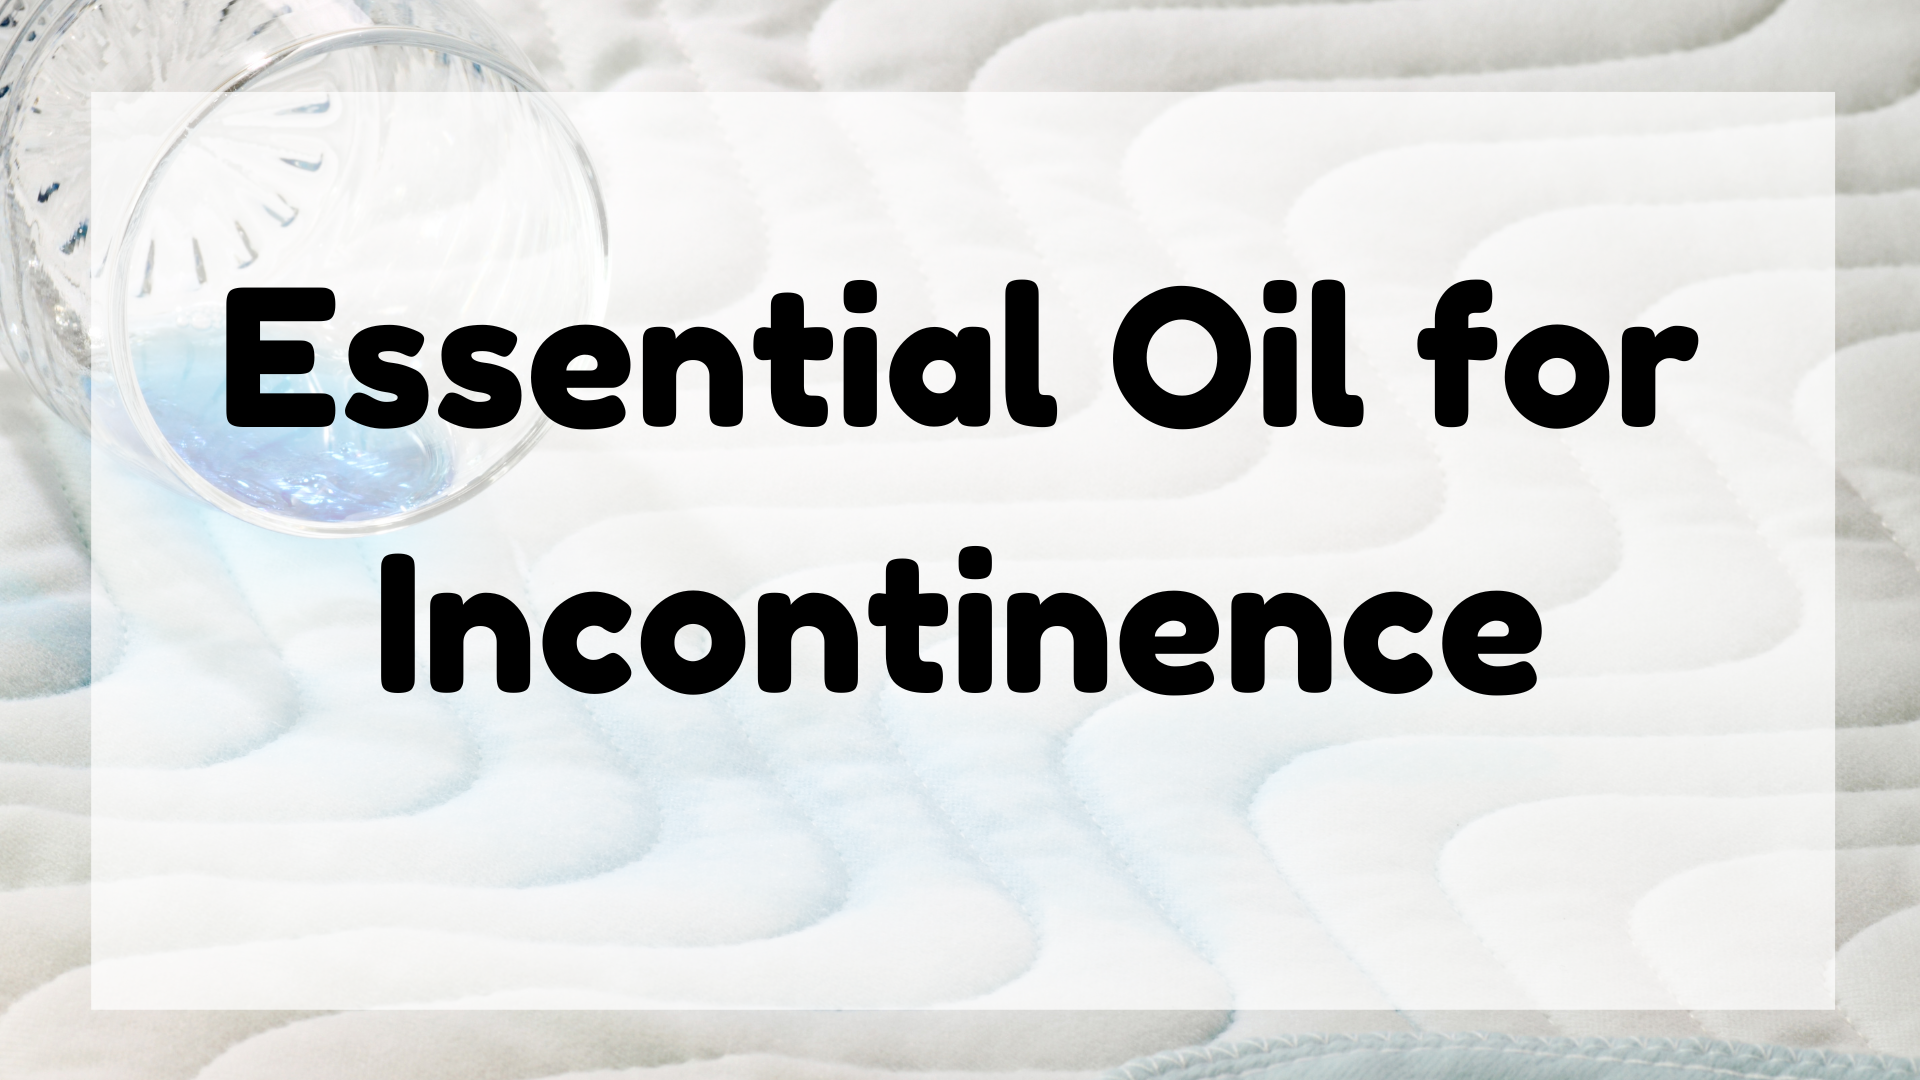 Essential Oil for Incontinence featured image